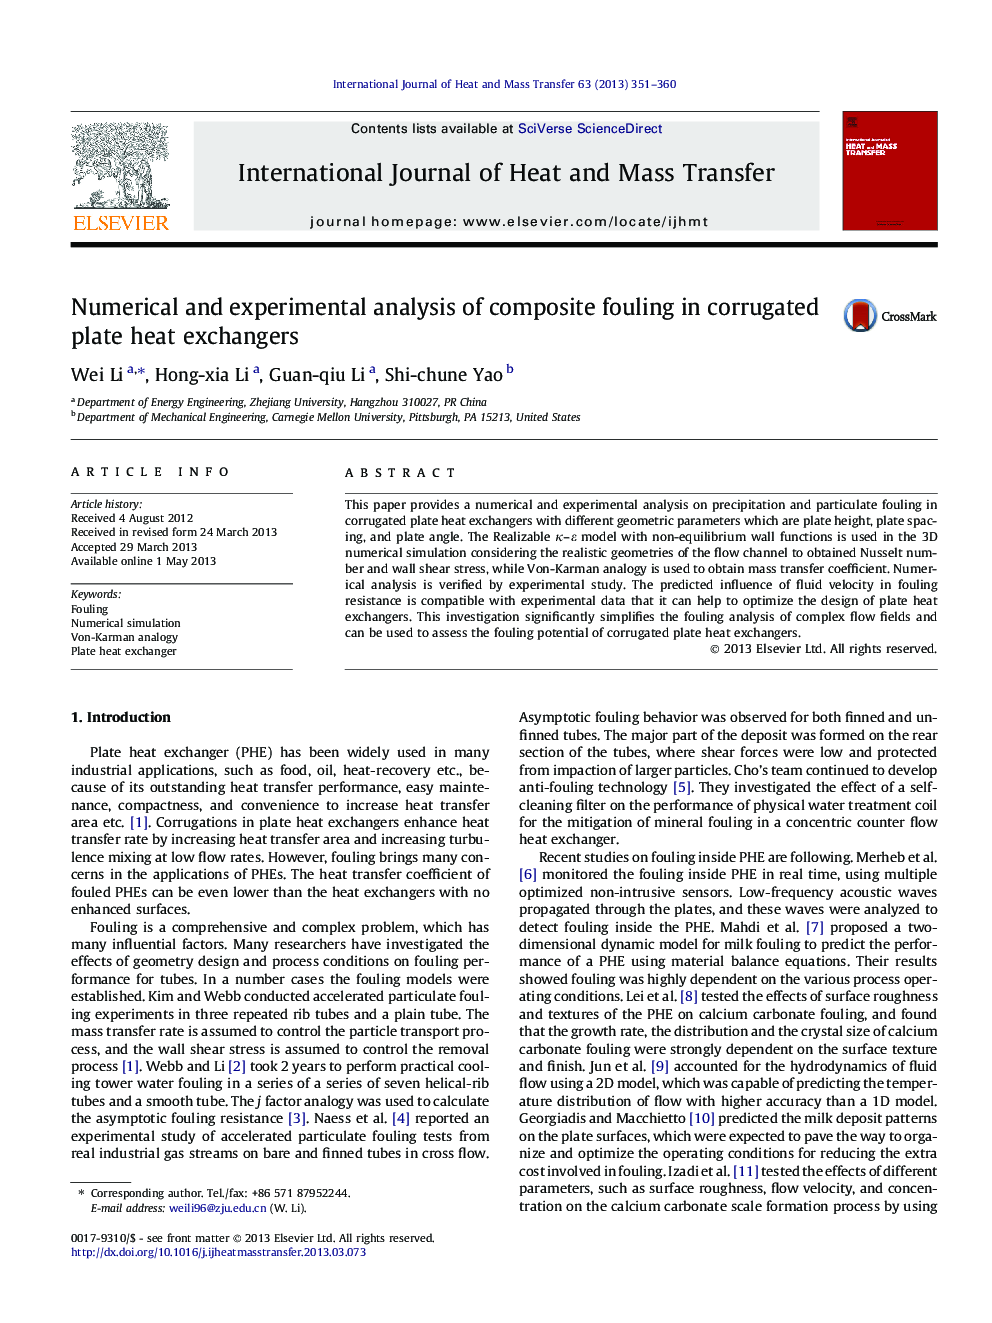 Numerical and experimental analysis of composite fouling in corrugated plate heat exchangers